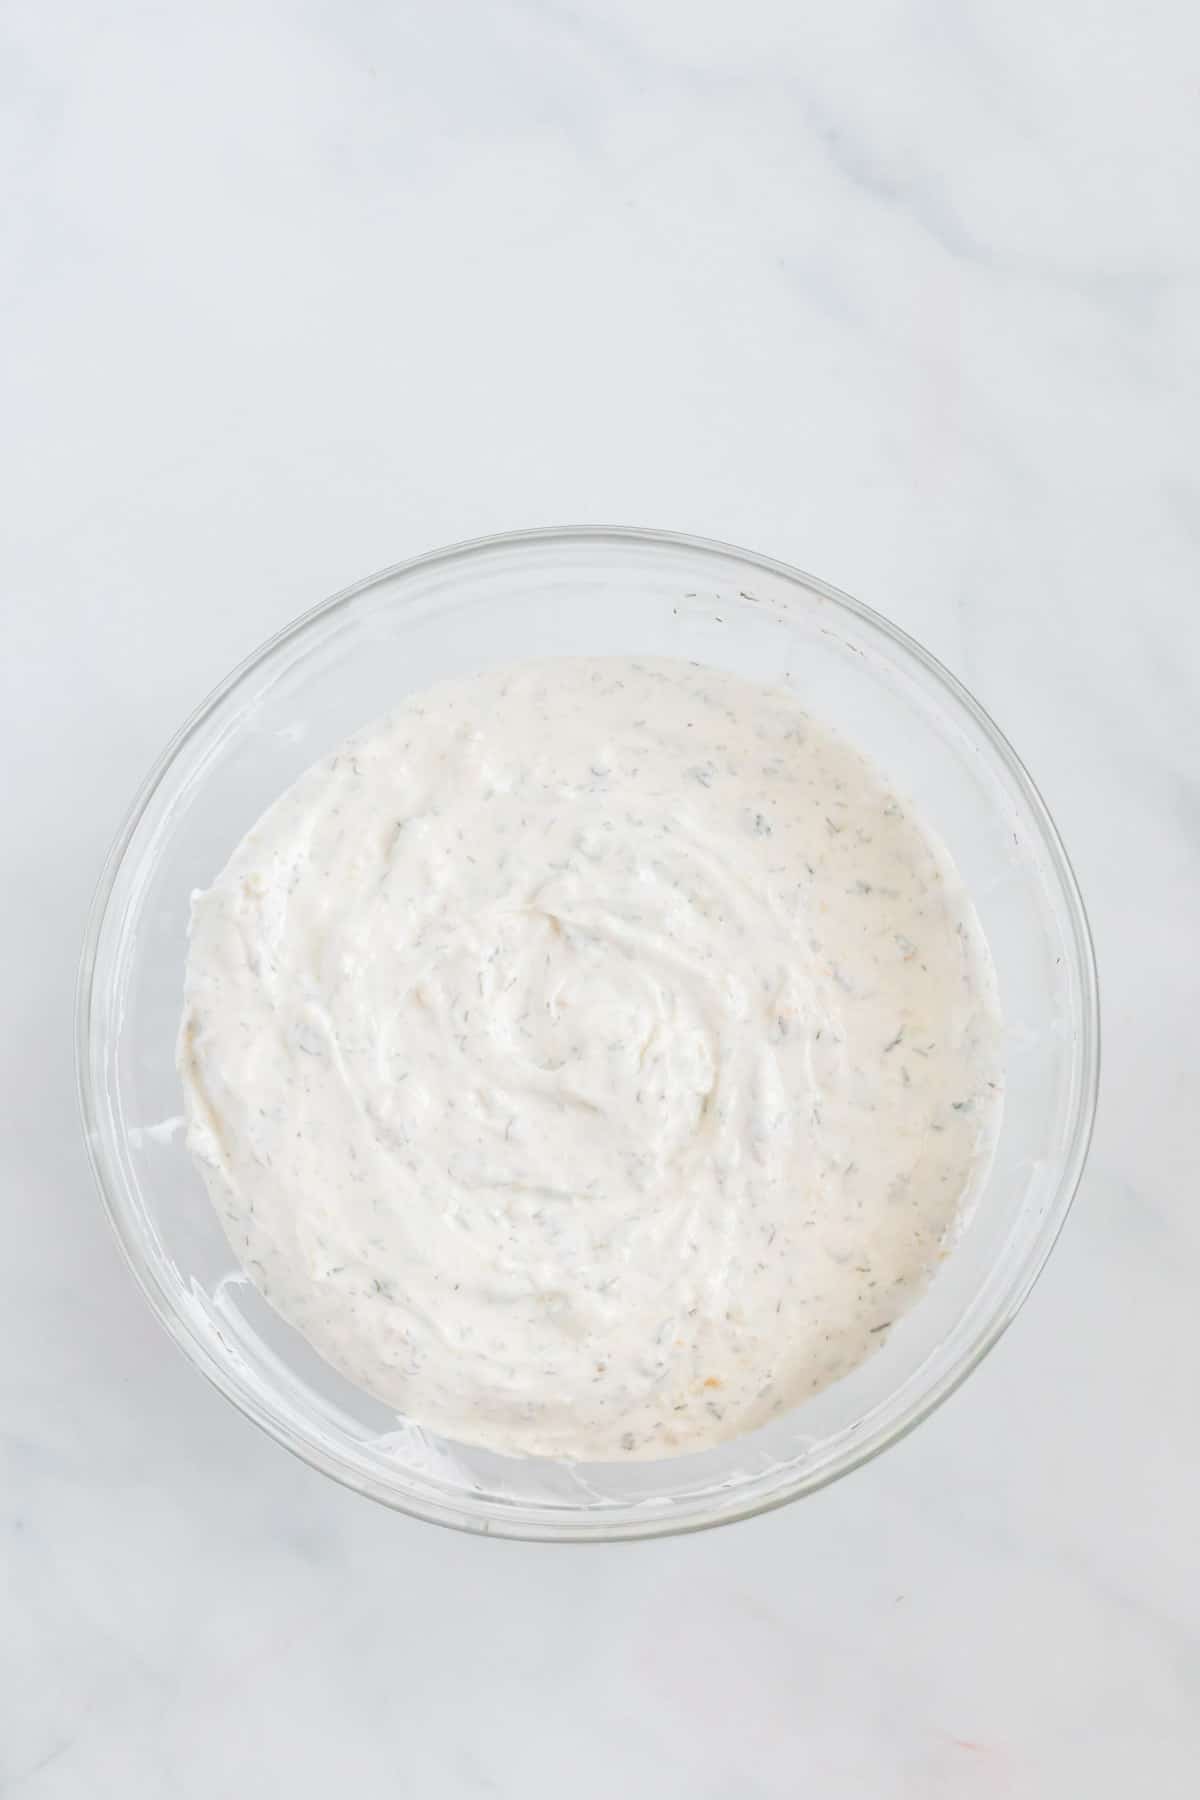 sour cream dip mixed together